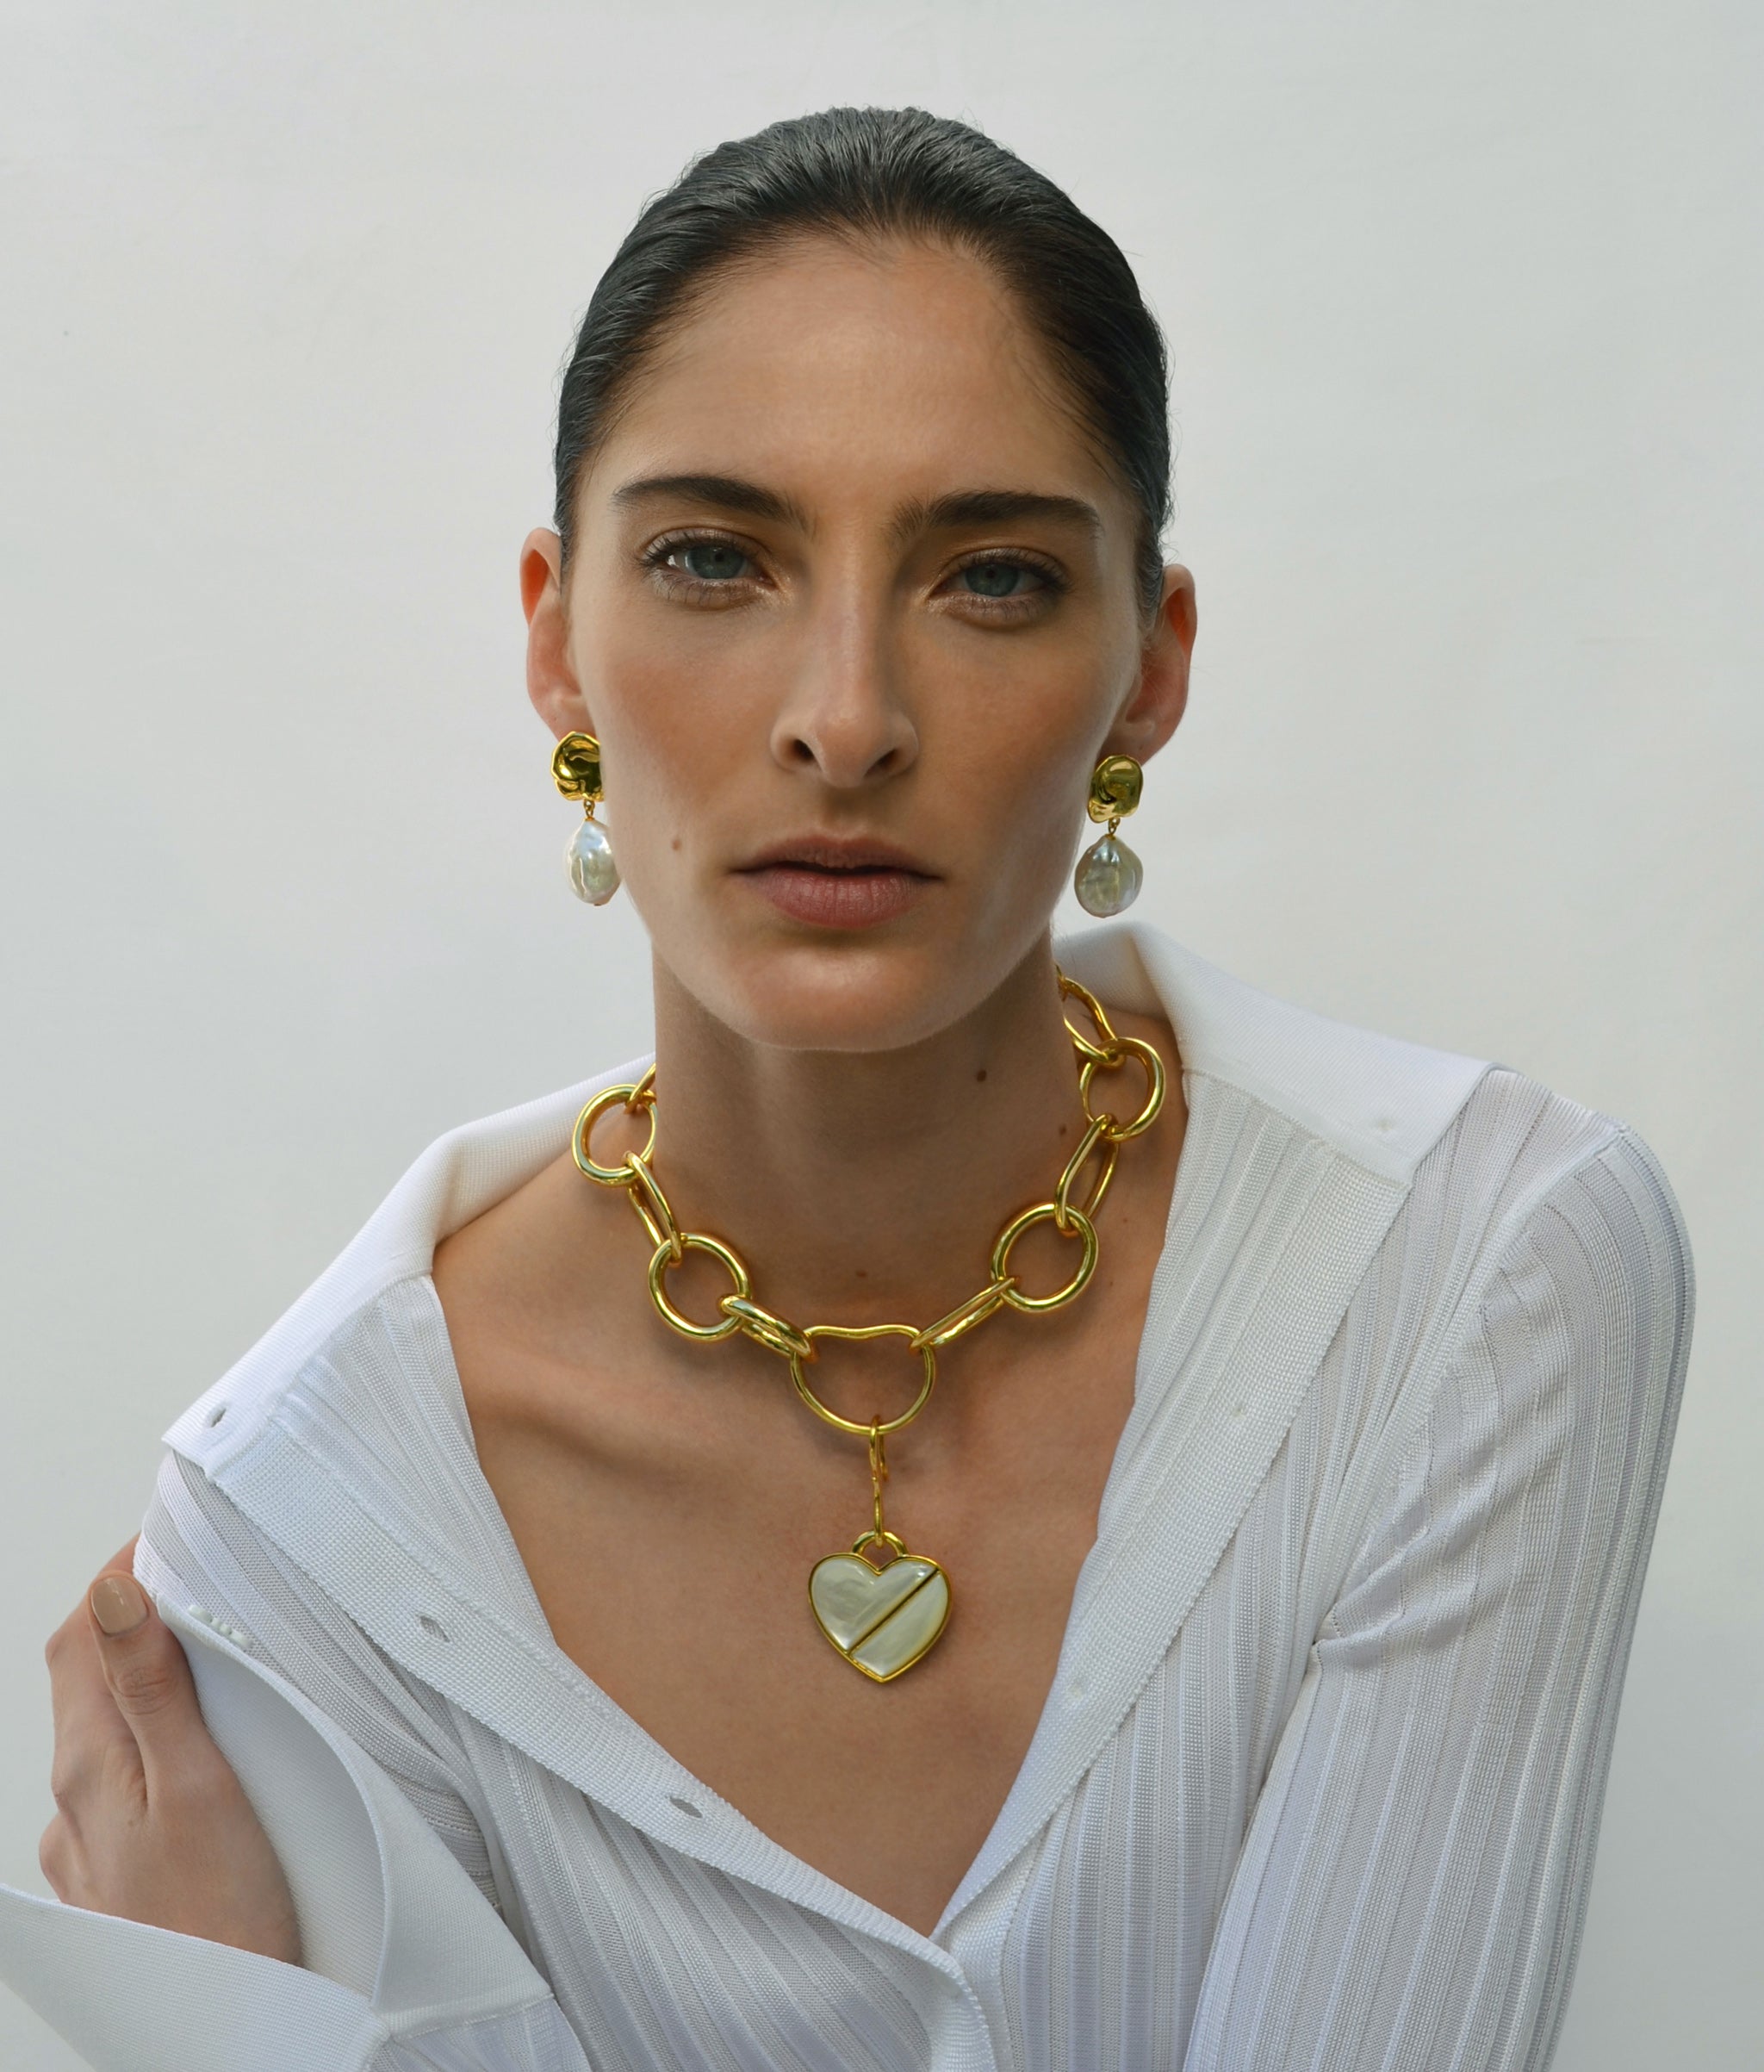 Model on grey backdrop wears white shirt with Porto Chain, Heart Pendant in Daydream, and Coin Reflection Earrings.